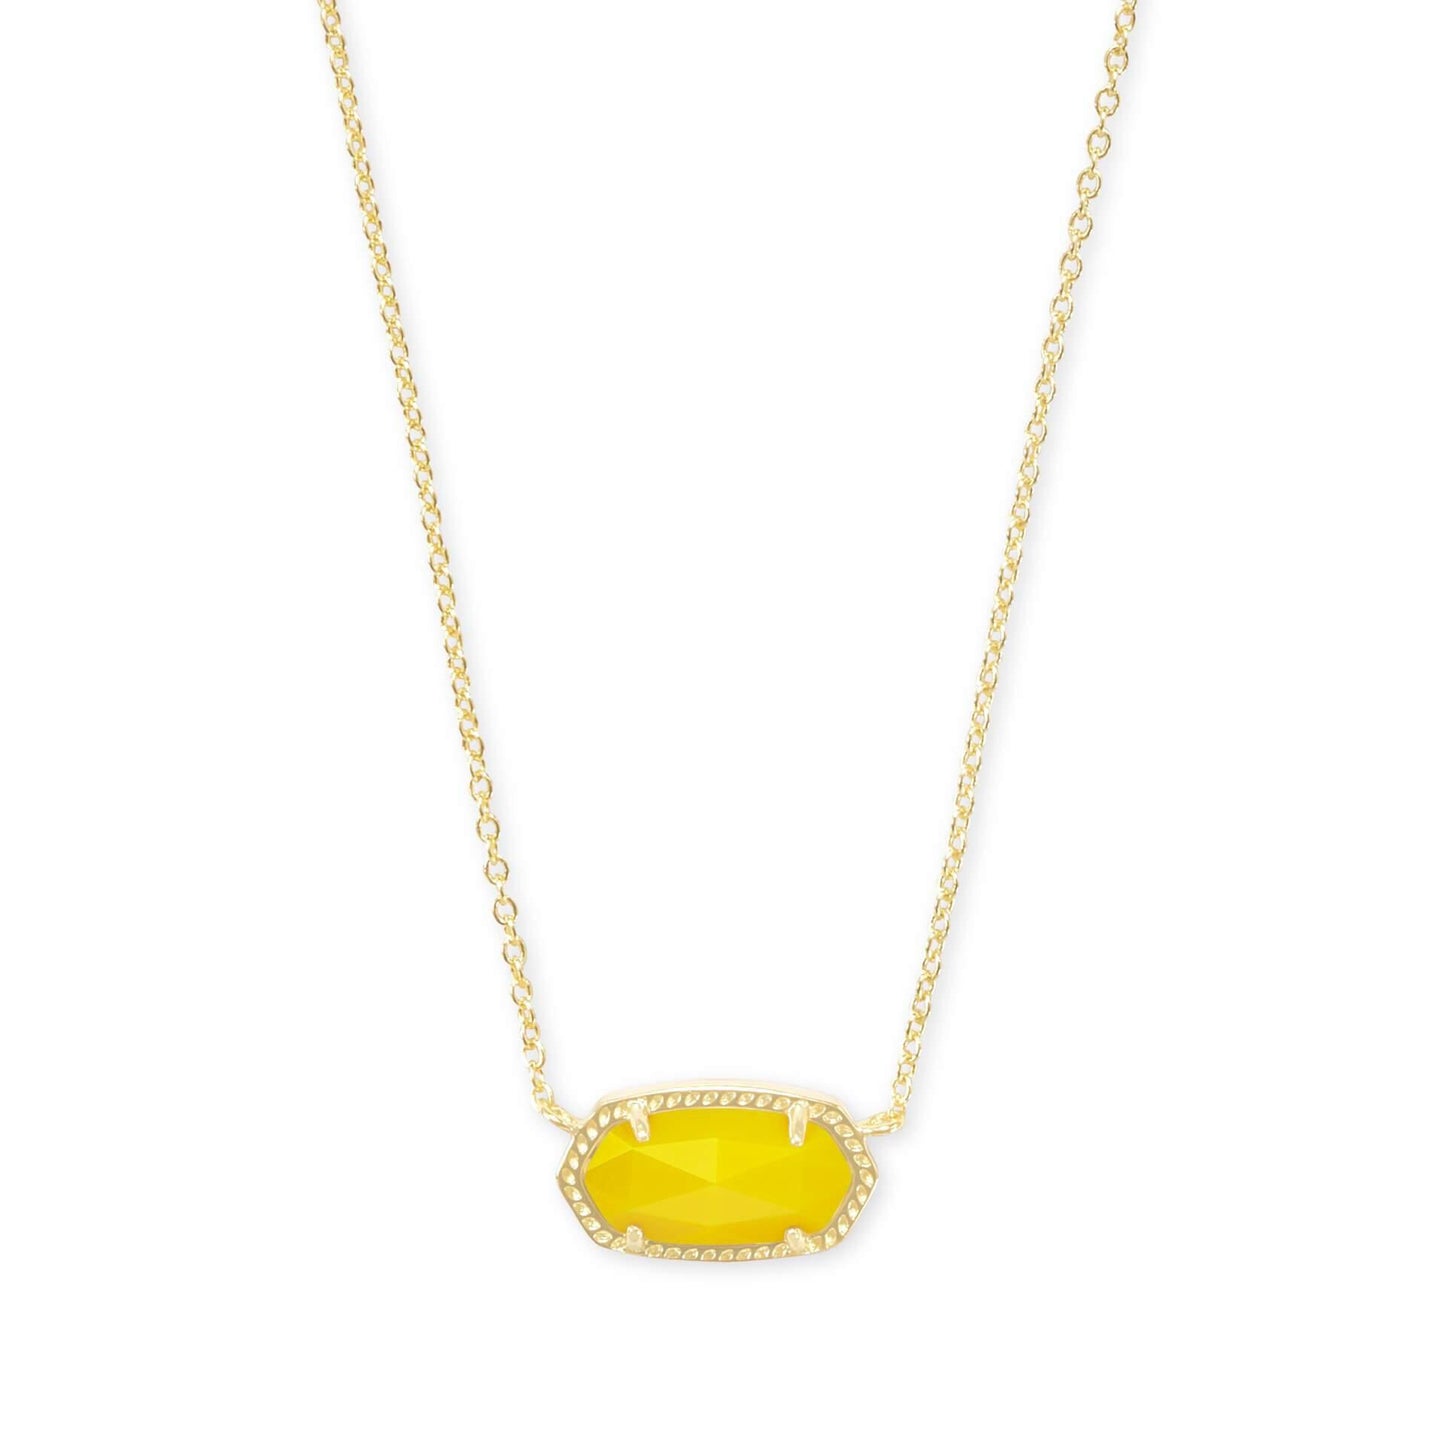 KS Elisa Necklace in Yellow Gold